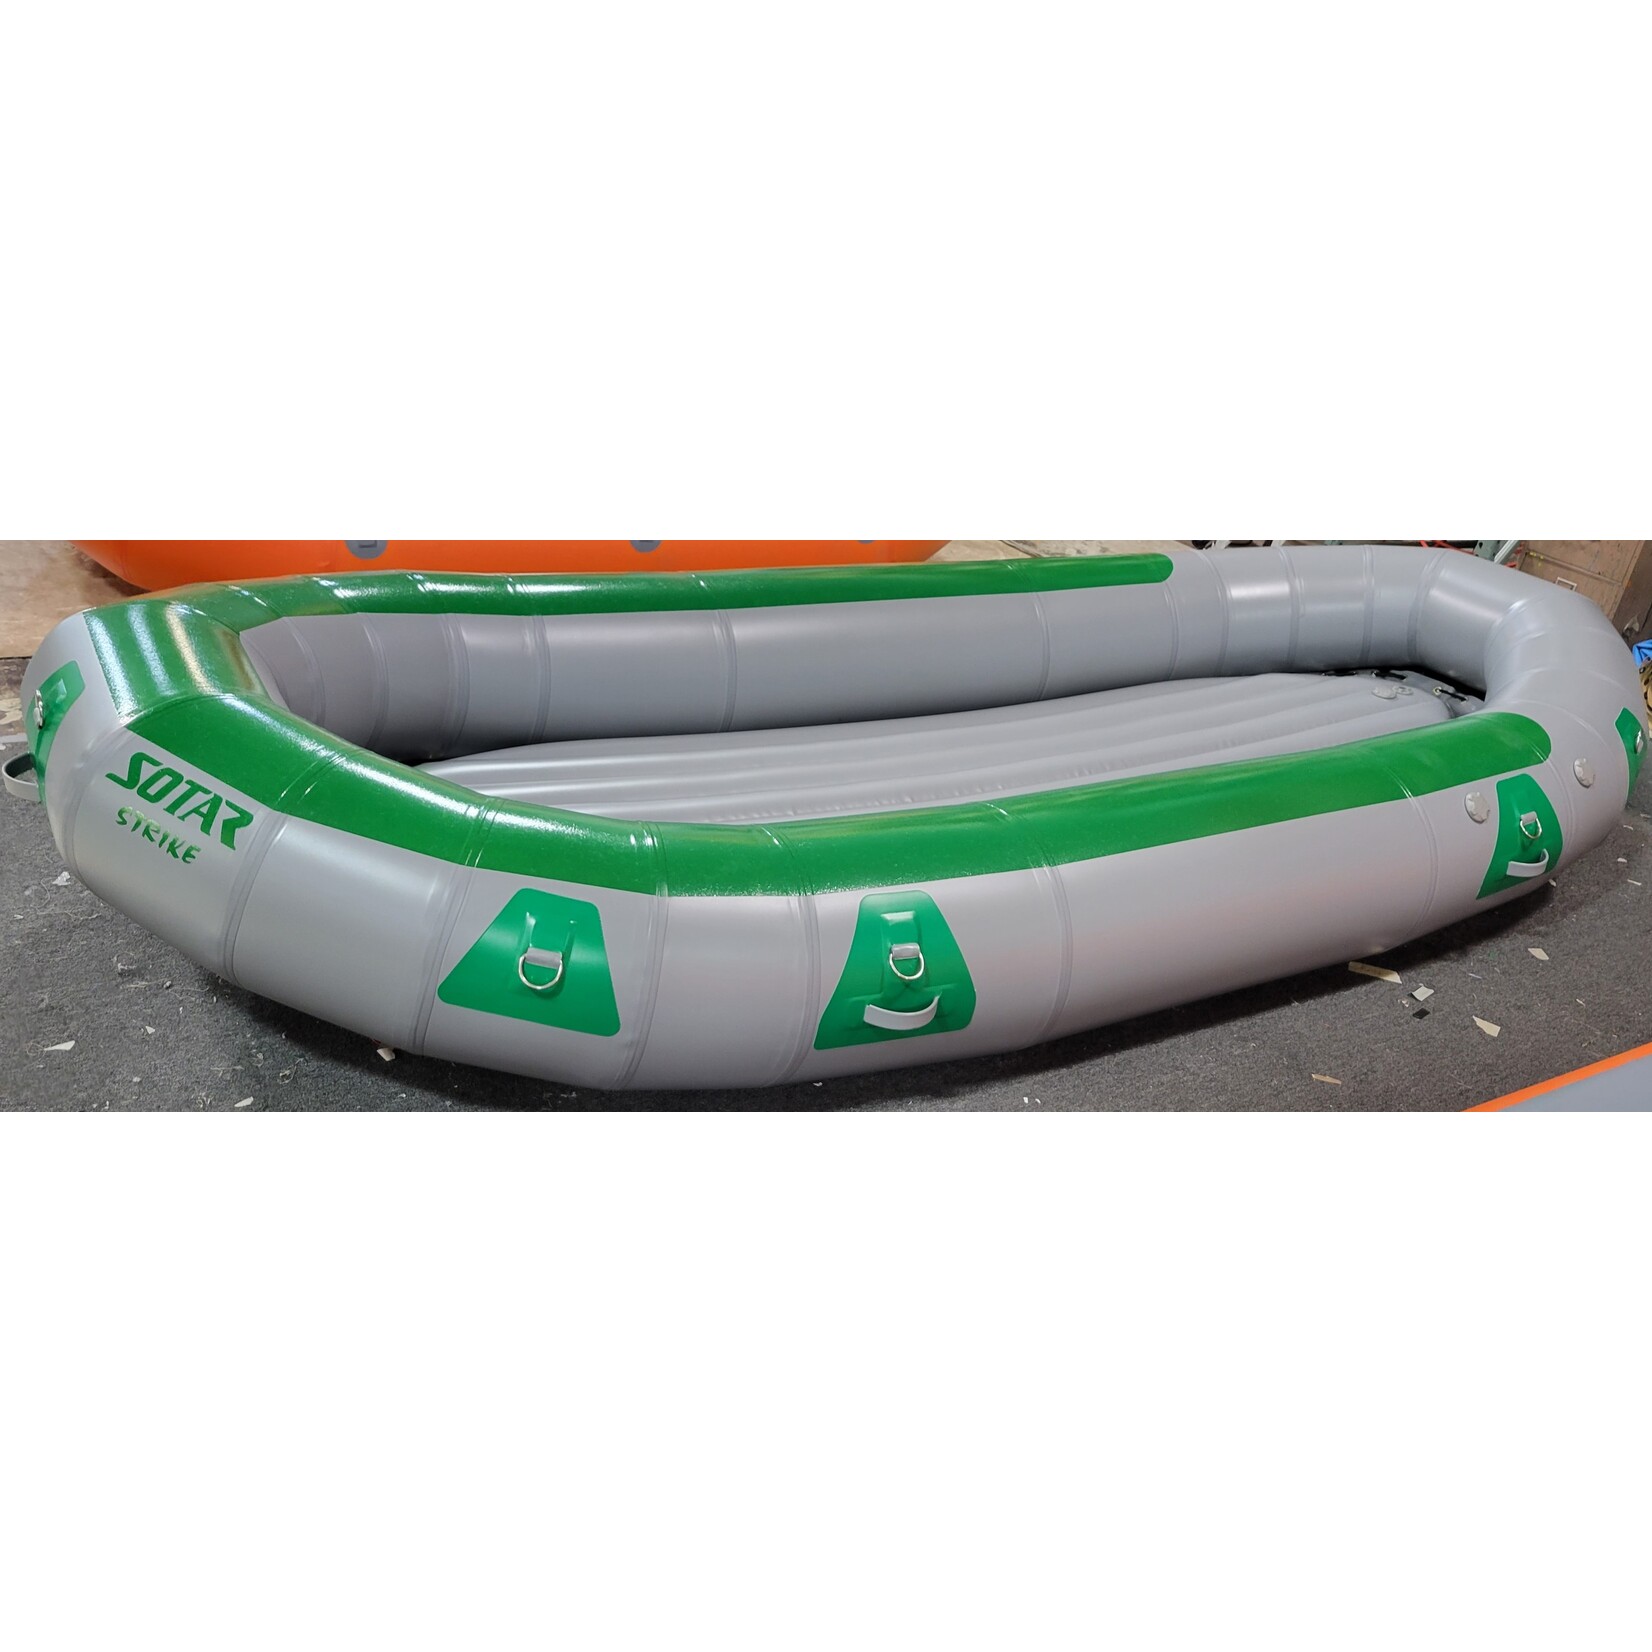 SOTAR Custom Whitewater Rafts, Catarafts, Inflatable Kayaks and more